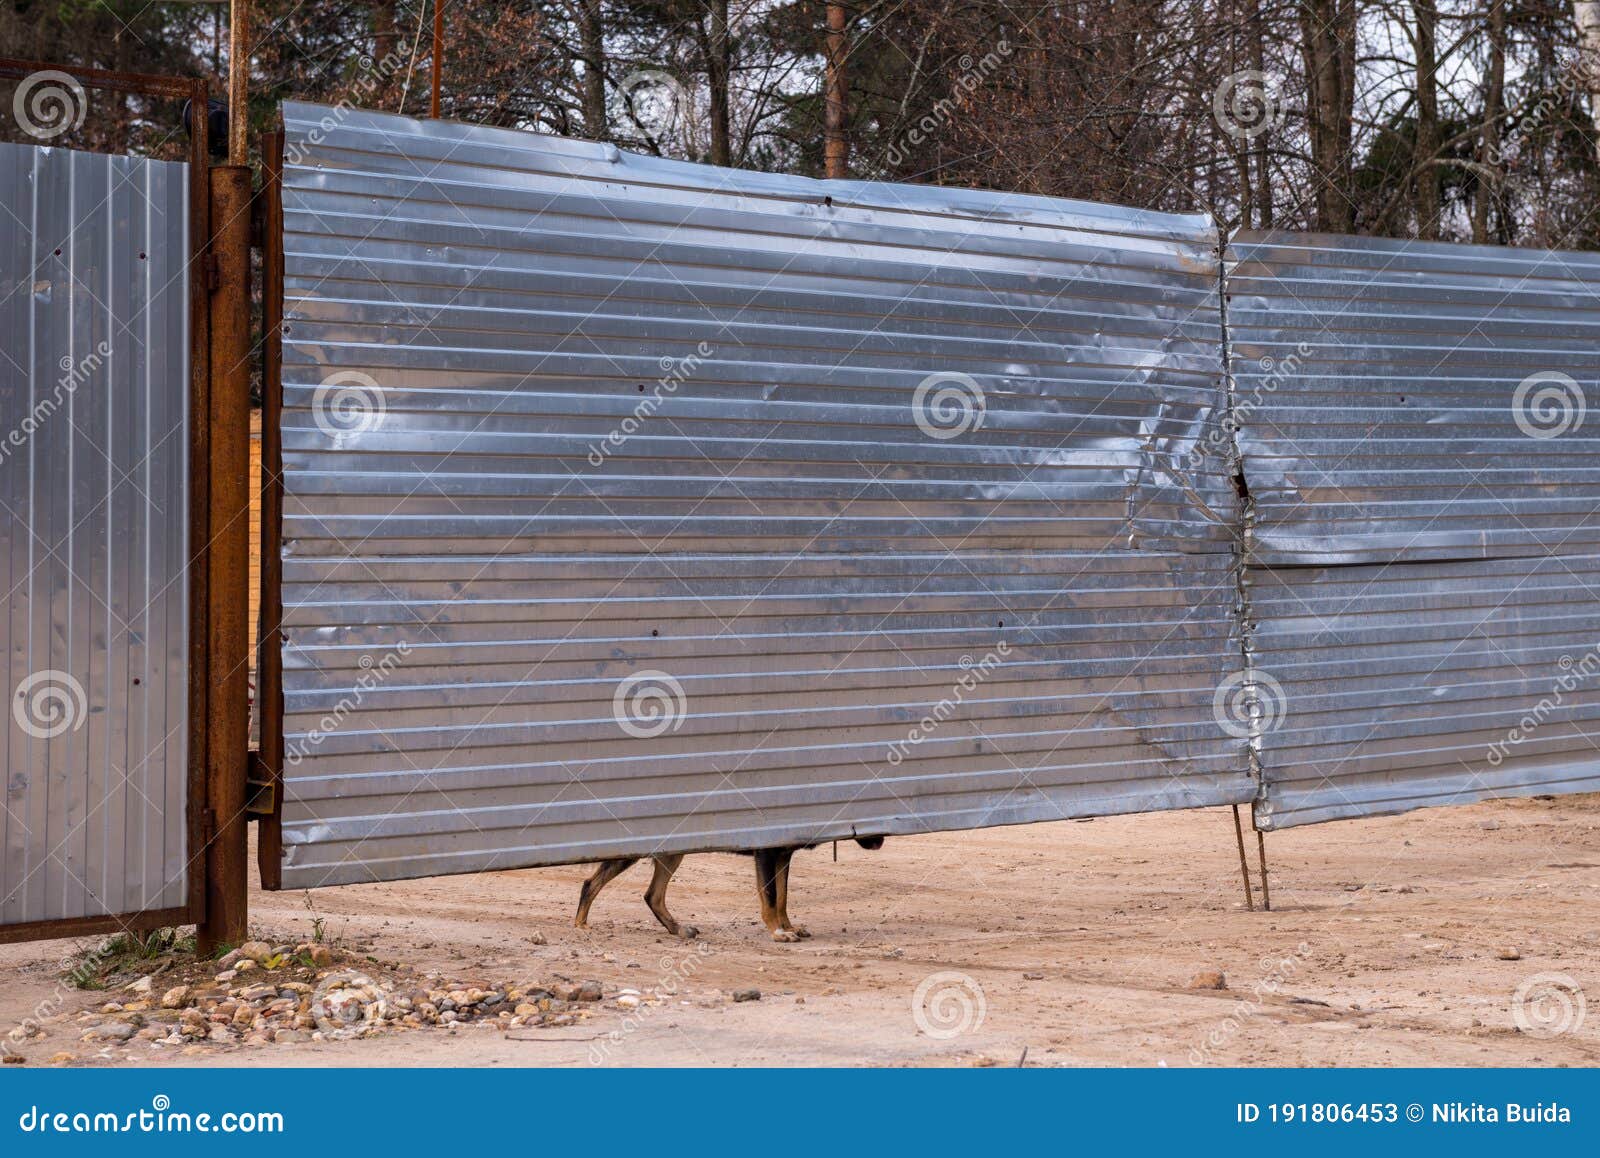 Guard Dog Looking Out From Under The Fence Stock Image Image Of Closeup Friend